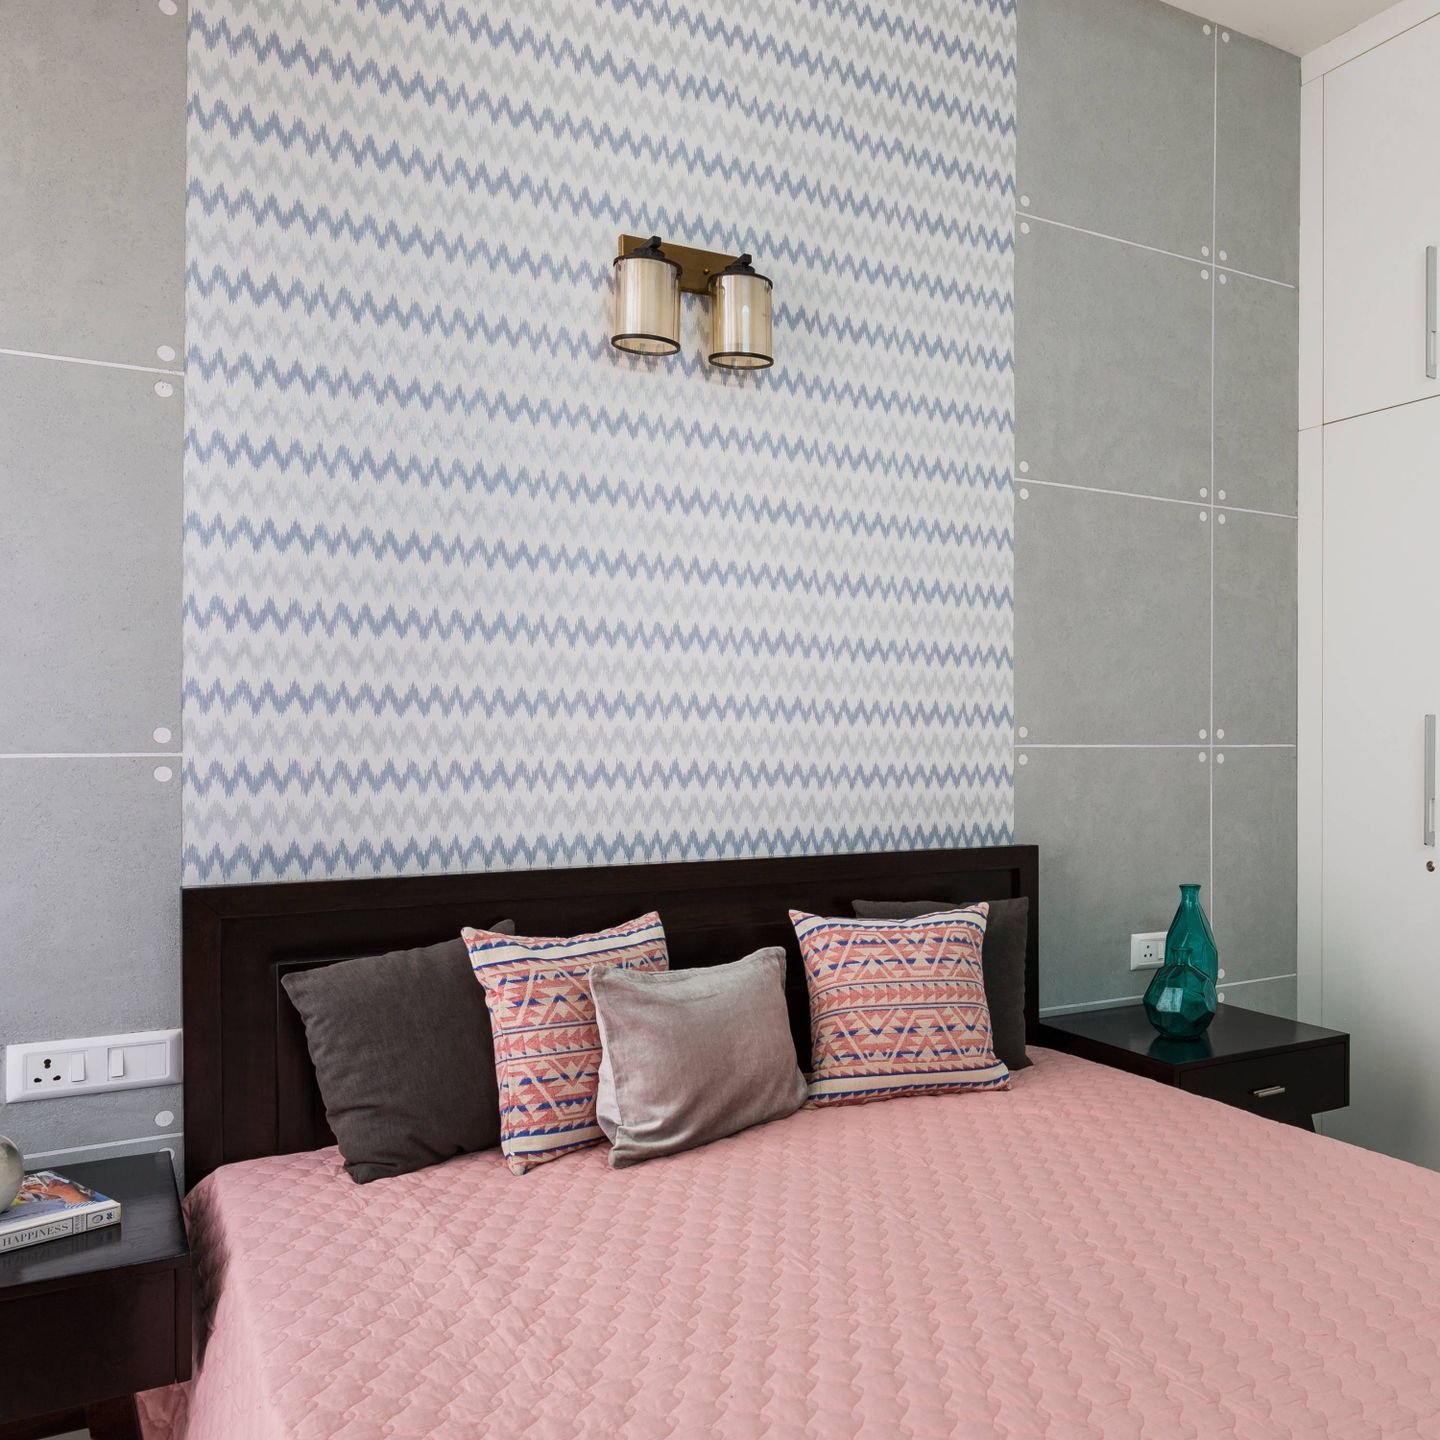 Blue And Grey Chevron-Patterned Wallpaper Design For Bedrooms - Livspace